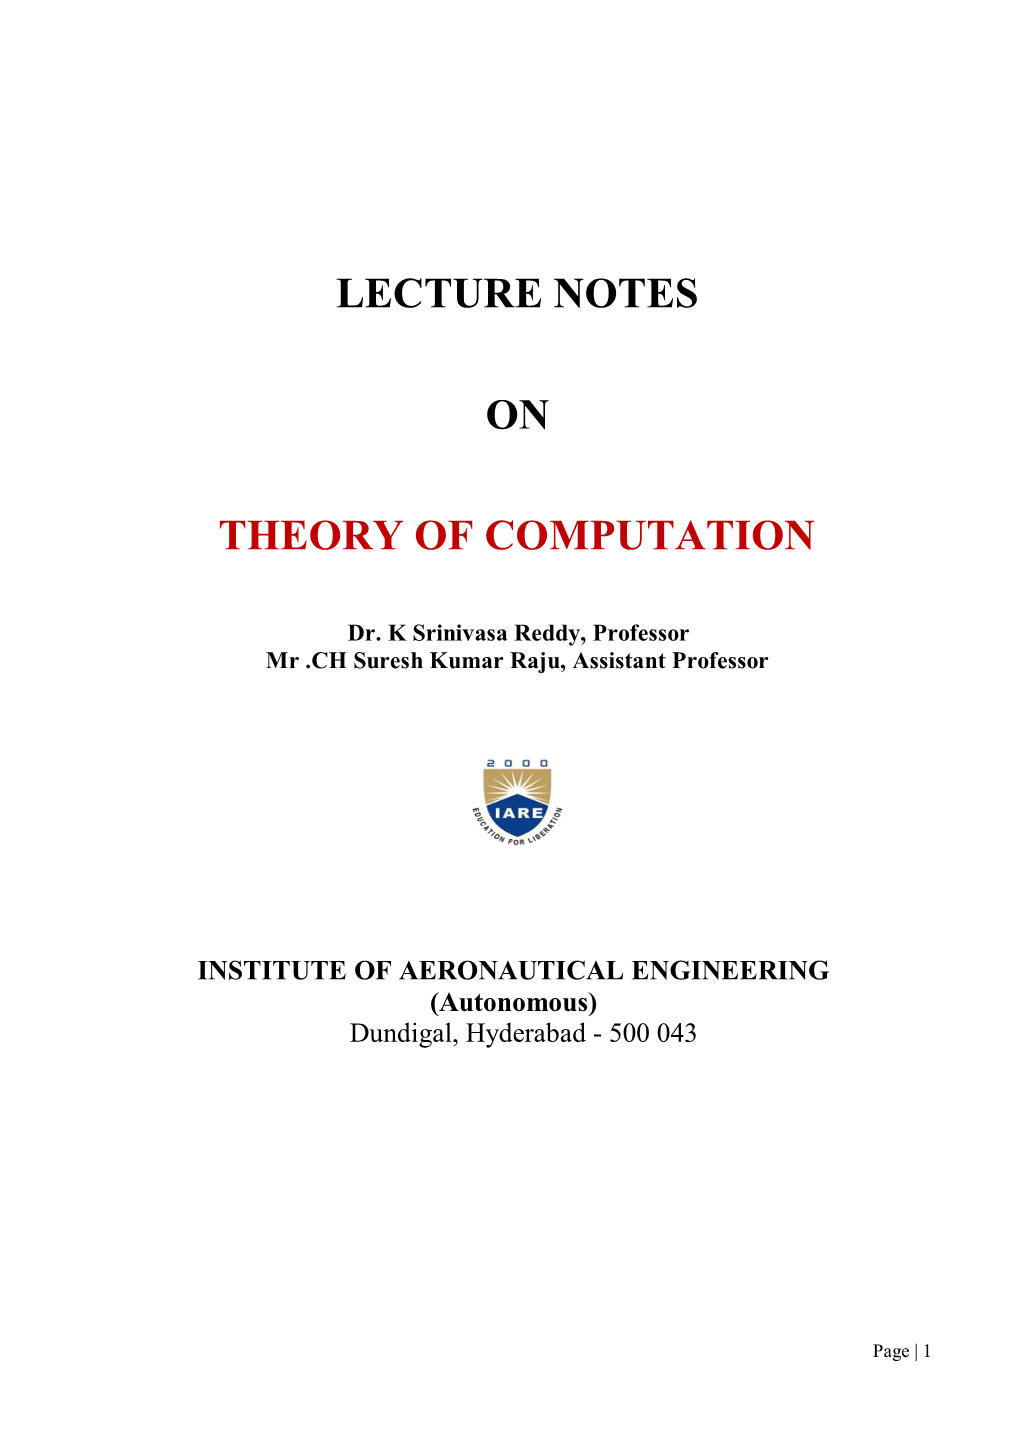 Lecture Notes on Theory of Computation